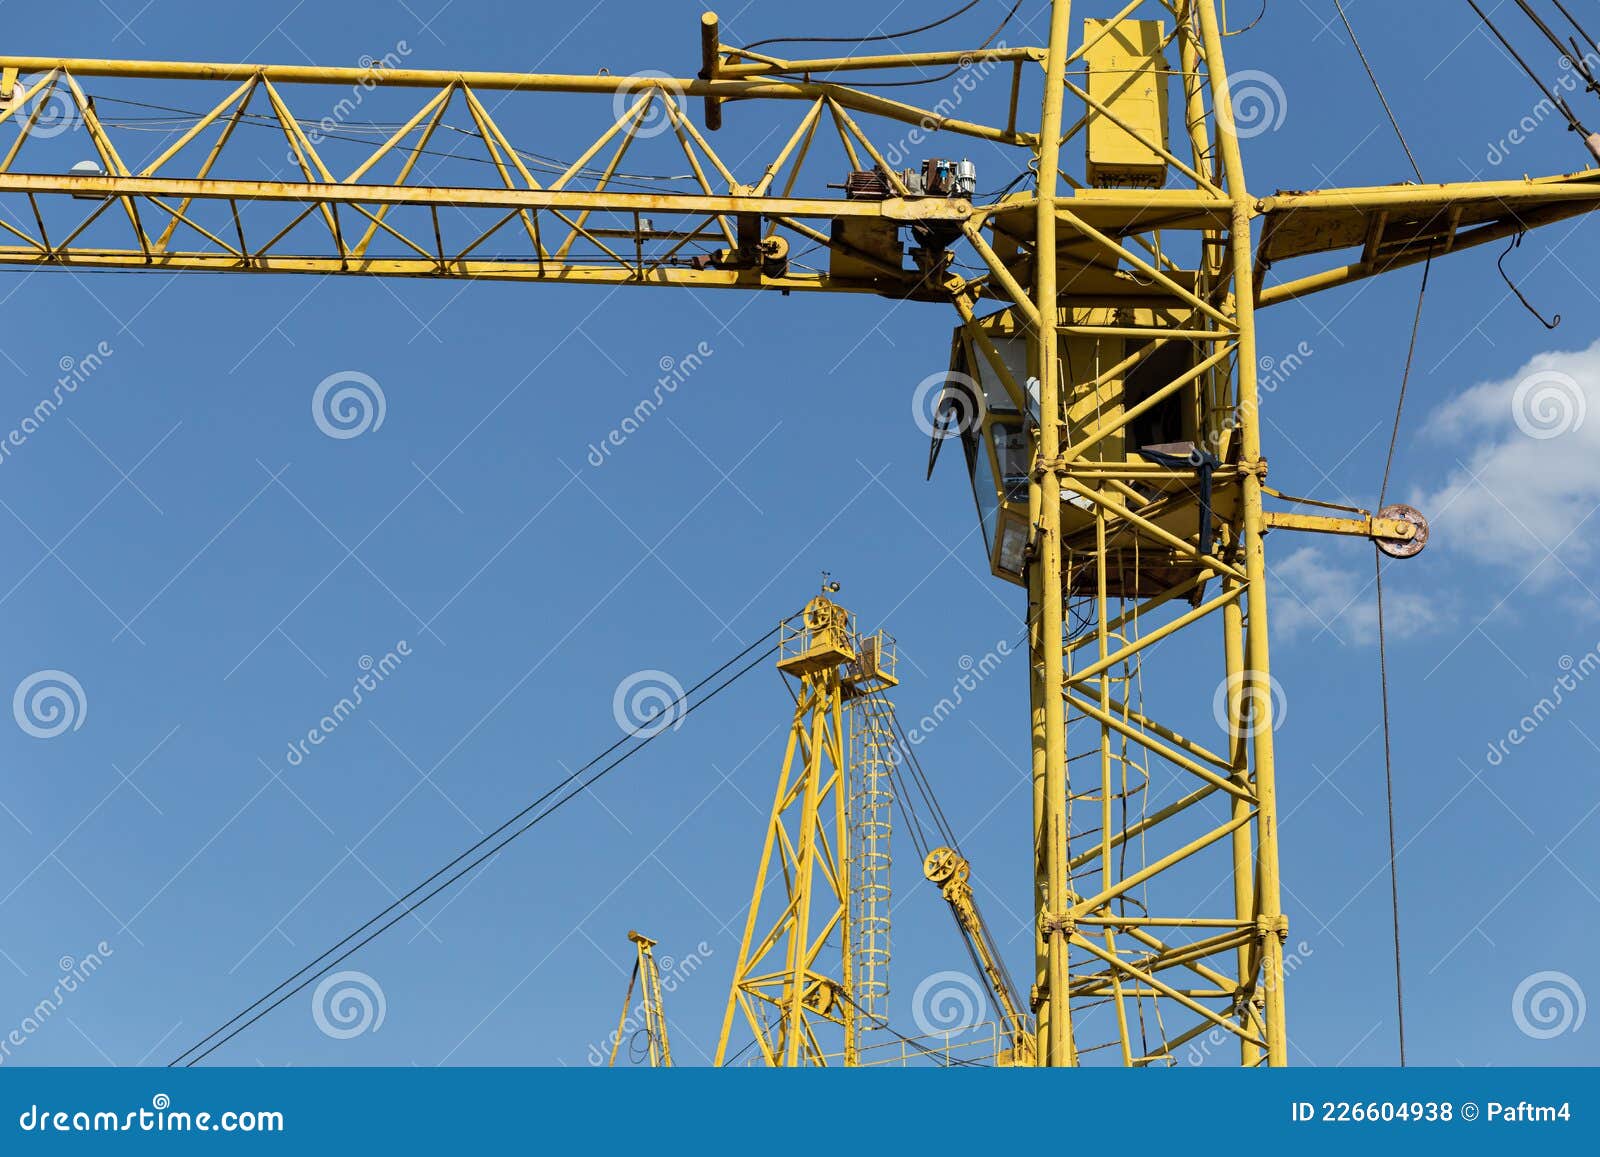 Tower Cranes with Hydraulic Boom Lift. Tower Cranes on the Construction ...